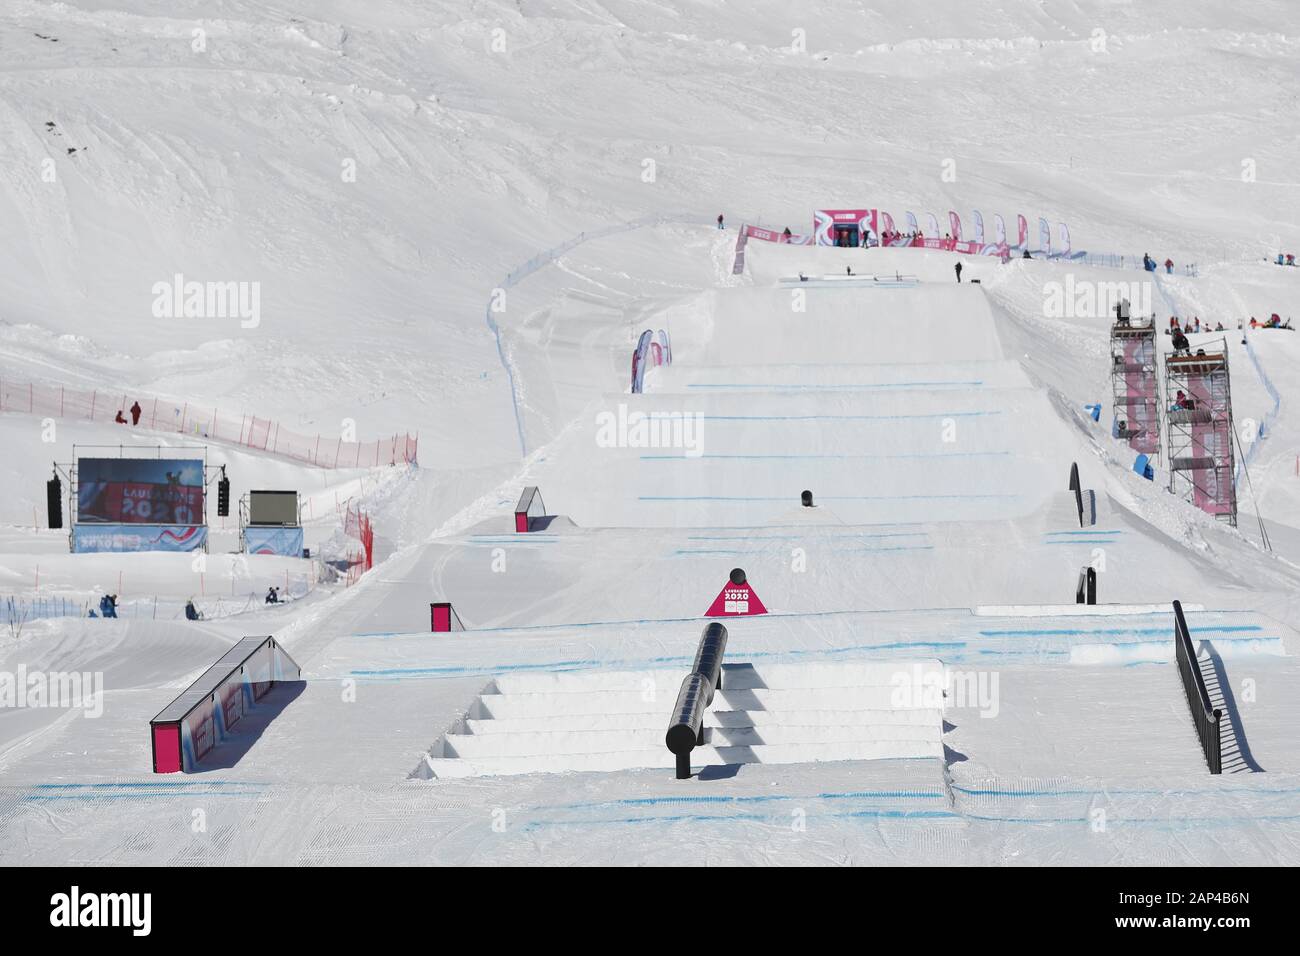 Leysin, Switzerland. 20th Jan, 2020. General view during the 3rd Winter Youth Olympic Games Lausanne 2020 Freestyle Skiing Slopestyle at Leysin Park & Pipe in Leysin, Switzerland, January 20, 2020. Credit: AFLO SPORT/Alamy Live News Stock Photo